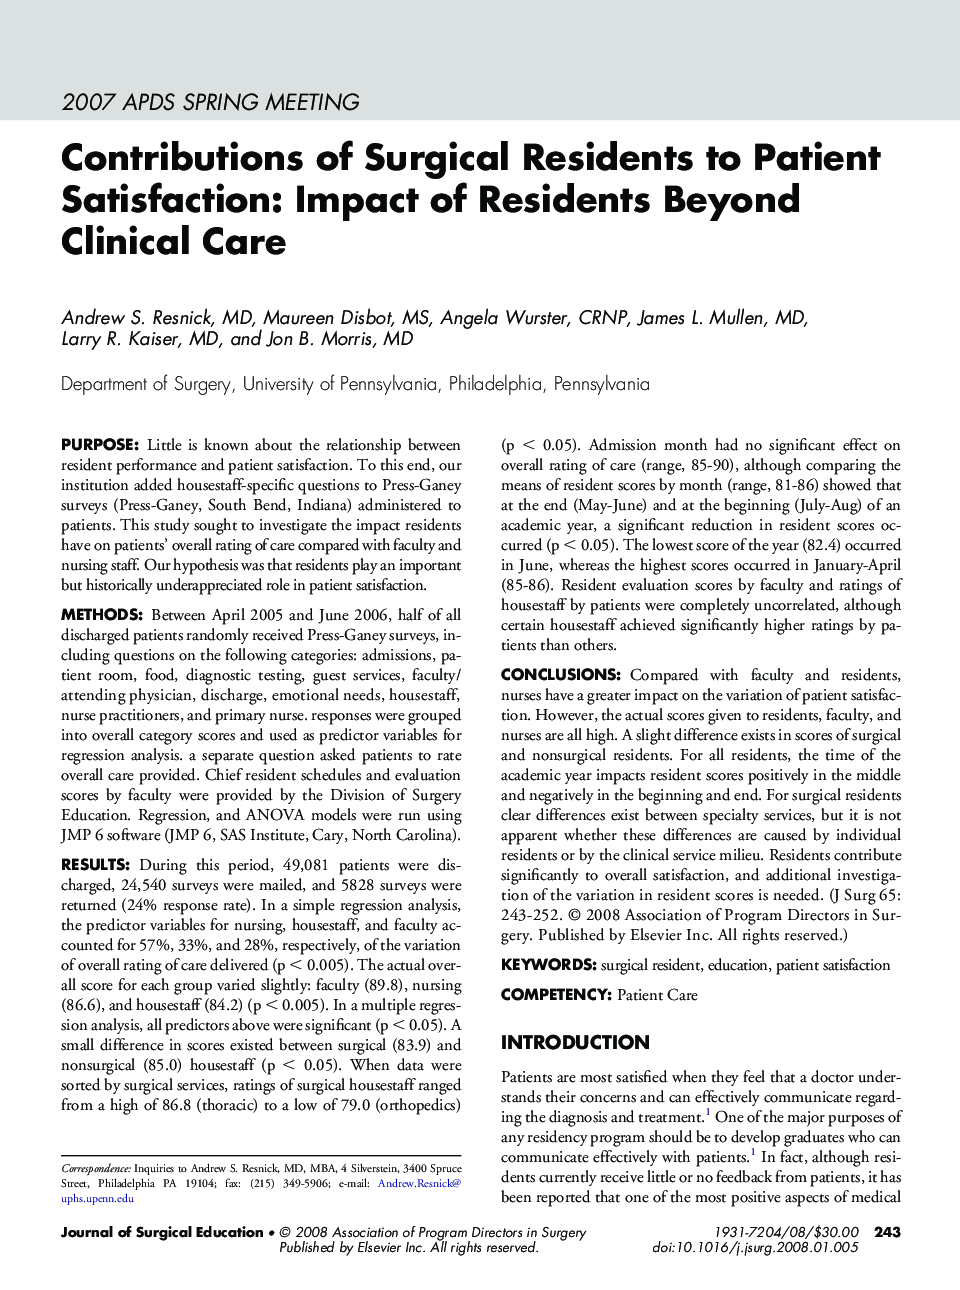 Contributions of Surgical Residents to Patient Satisfaction: Impact of Residents Beyond Clinical Care